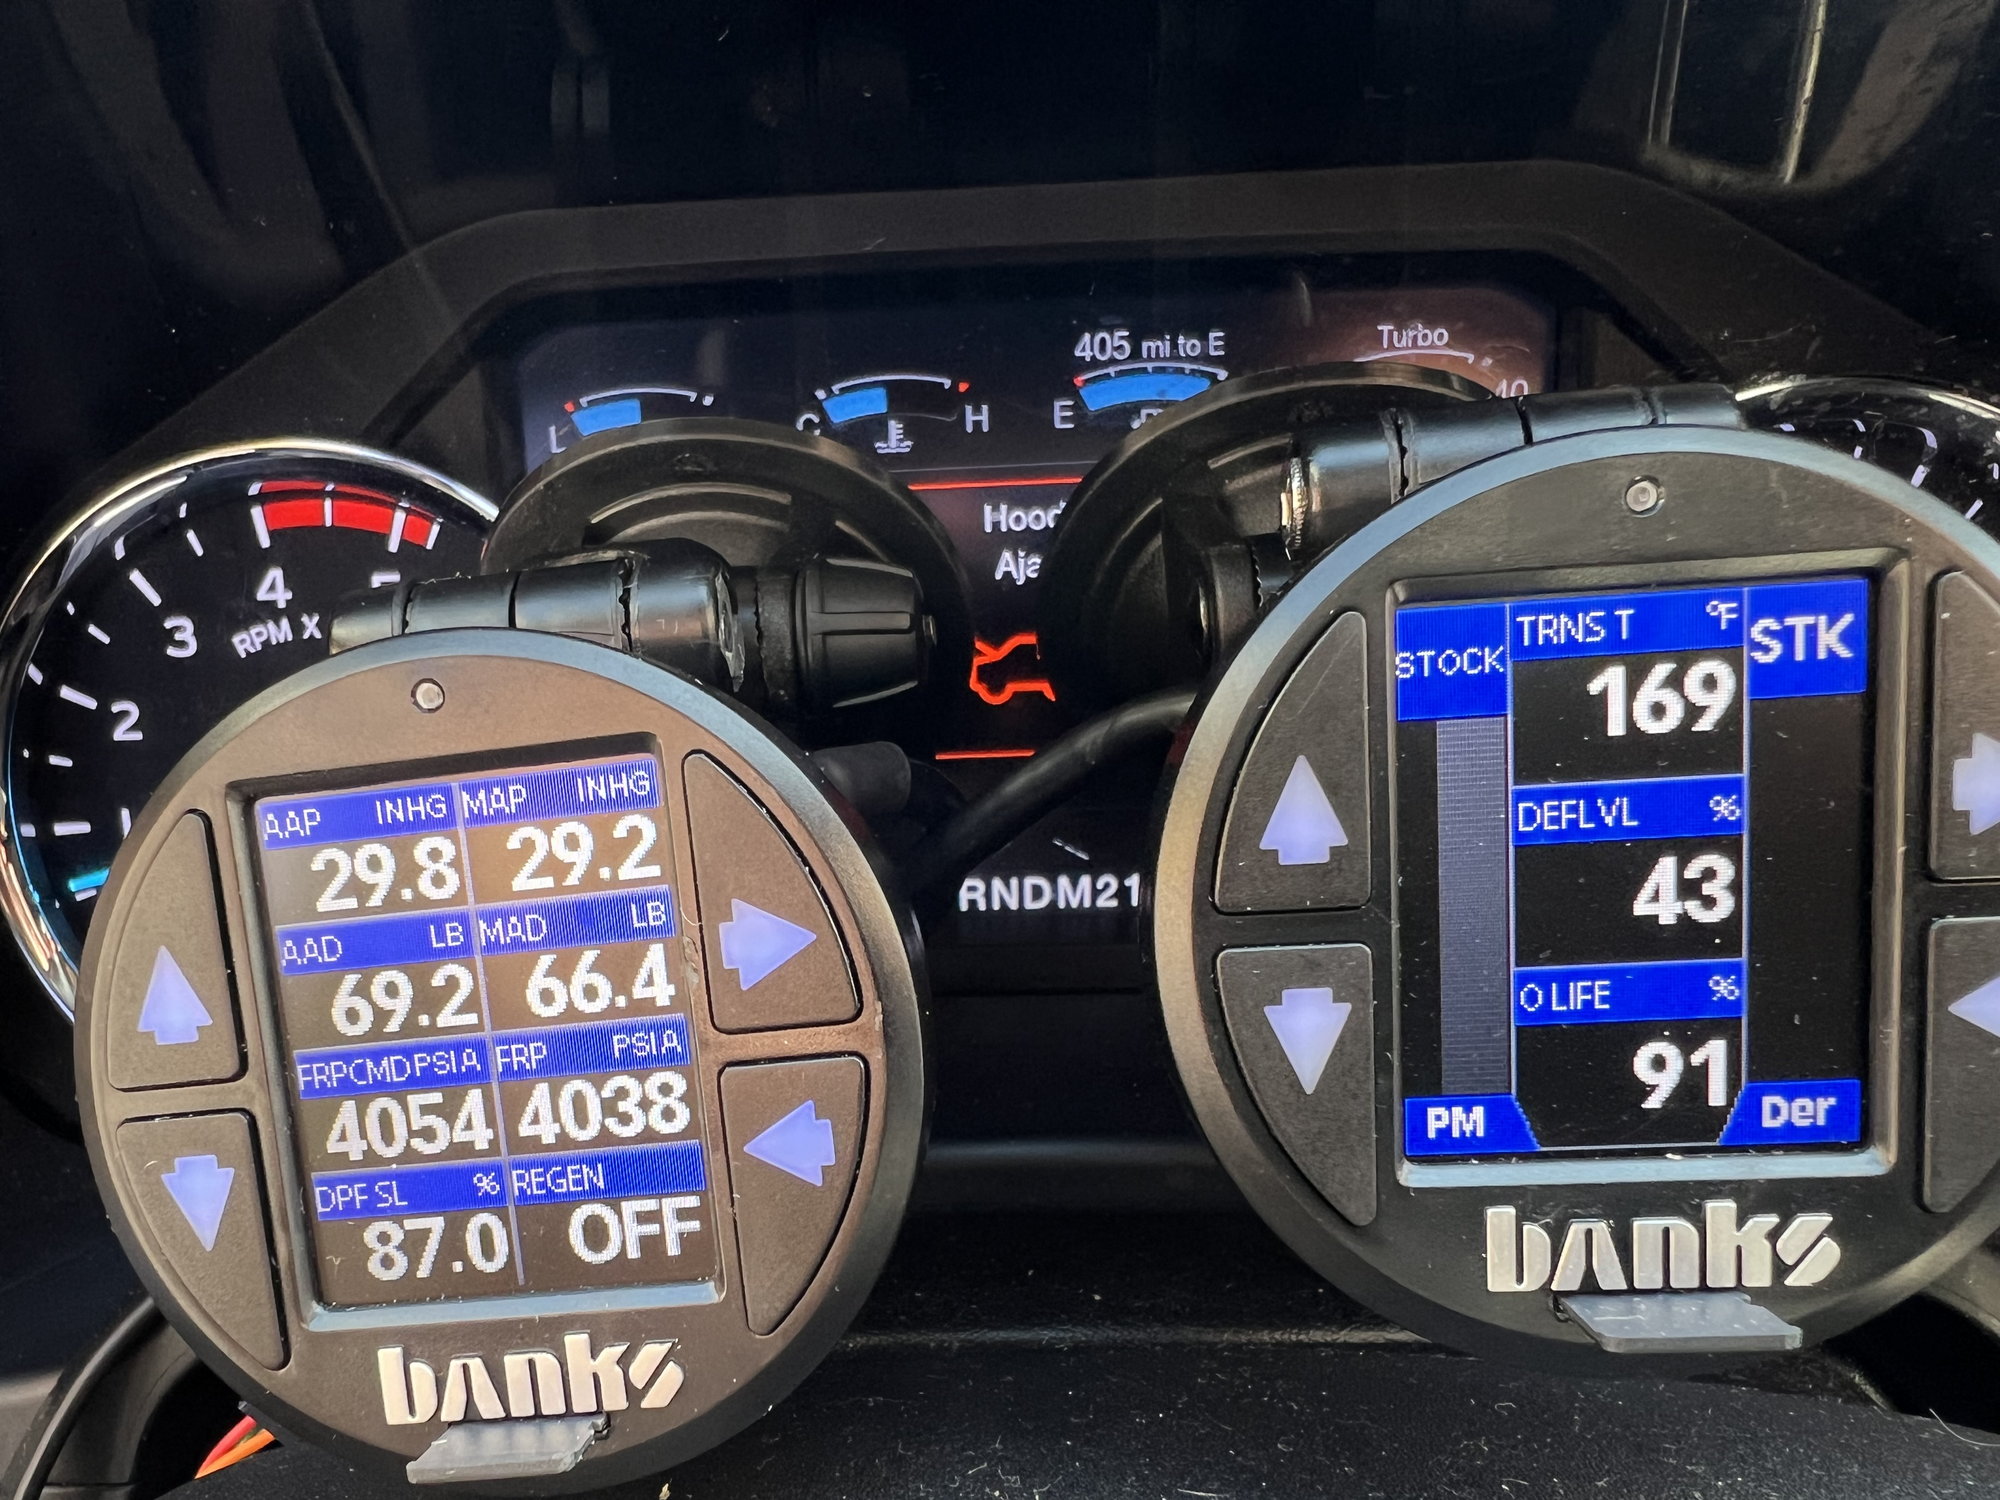 P0069 code, Boost Gauge pegged, turbo flutter - Ford Truck Enthusiasts ...